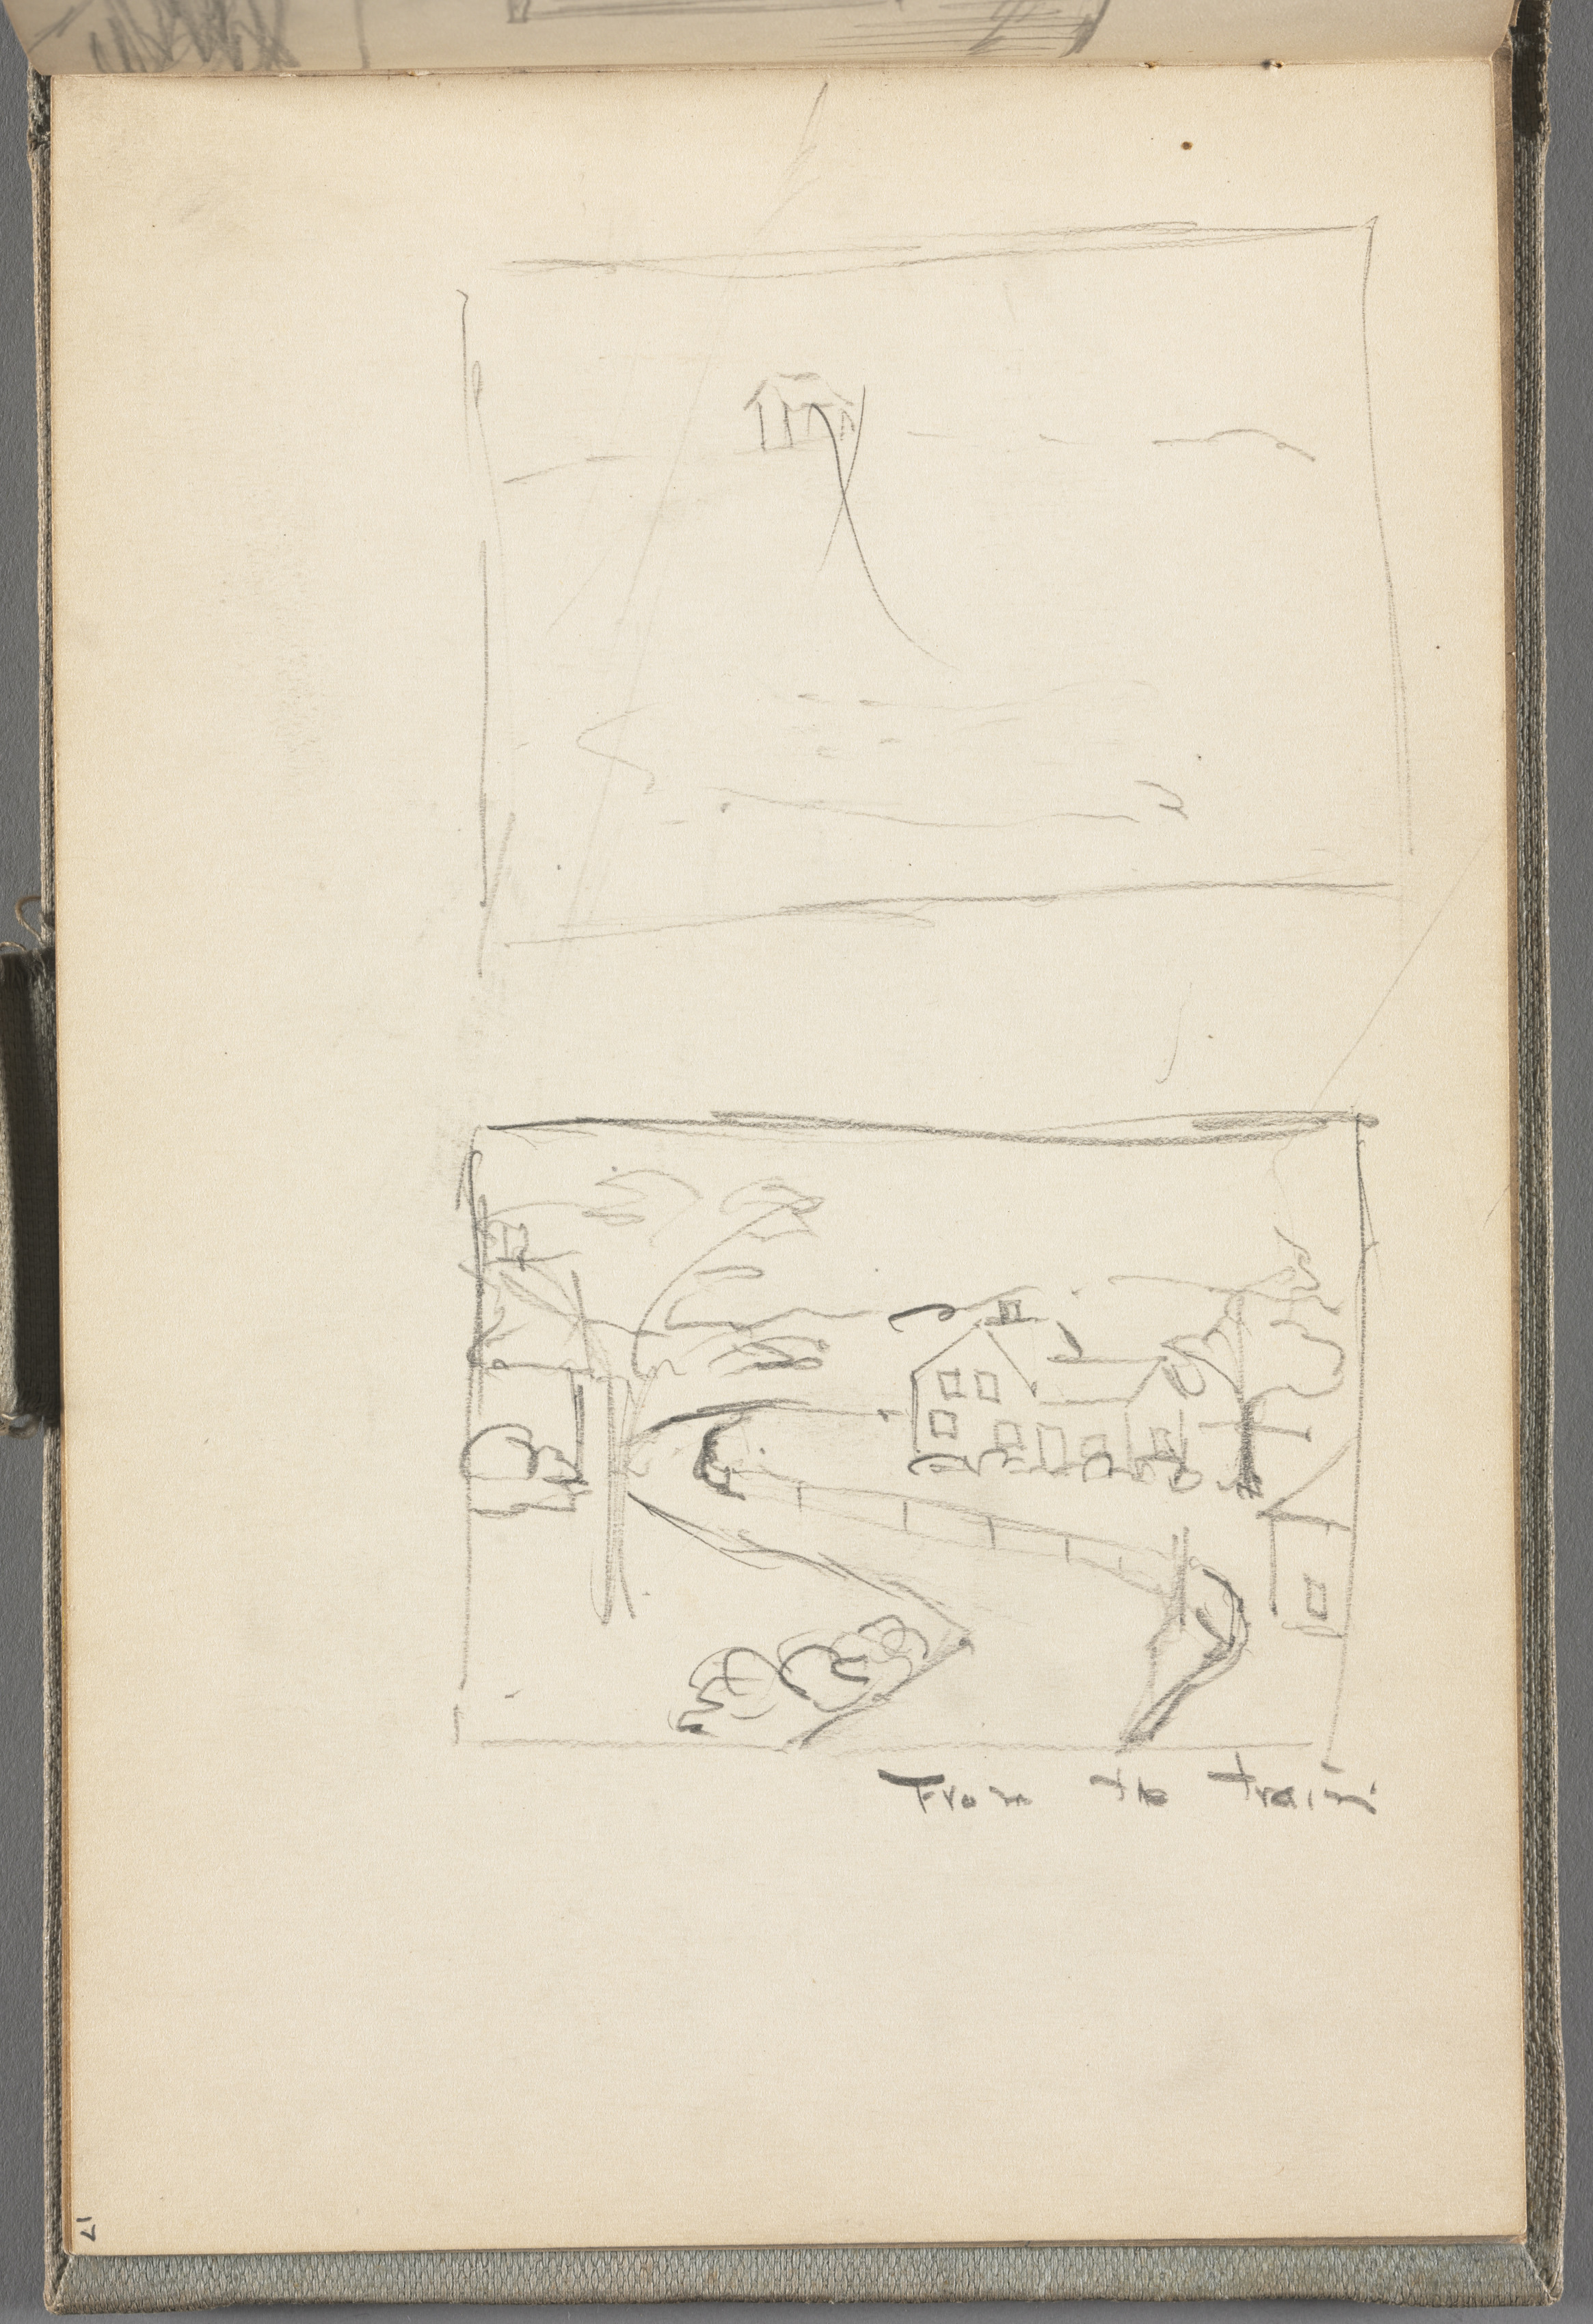 Sketchbook No. 5, page 17: Pencil sketch of road and house in border. In pencil: From the train